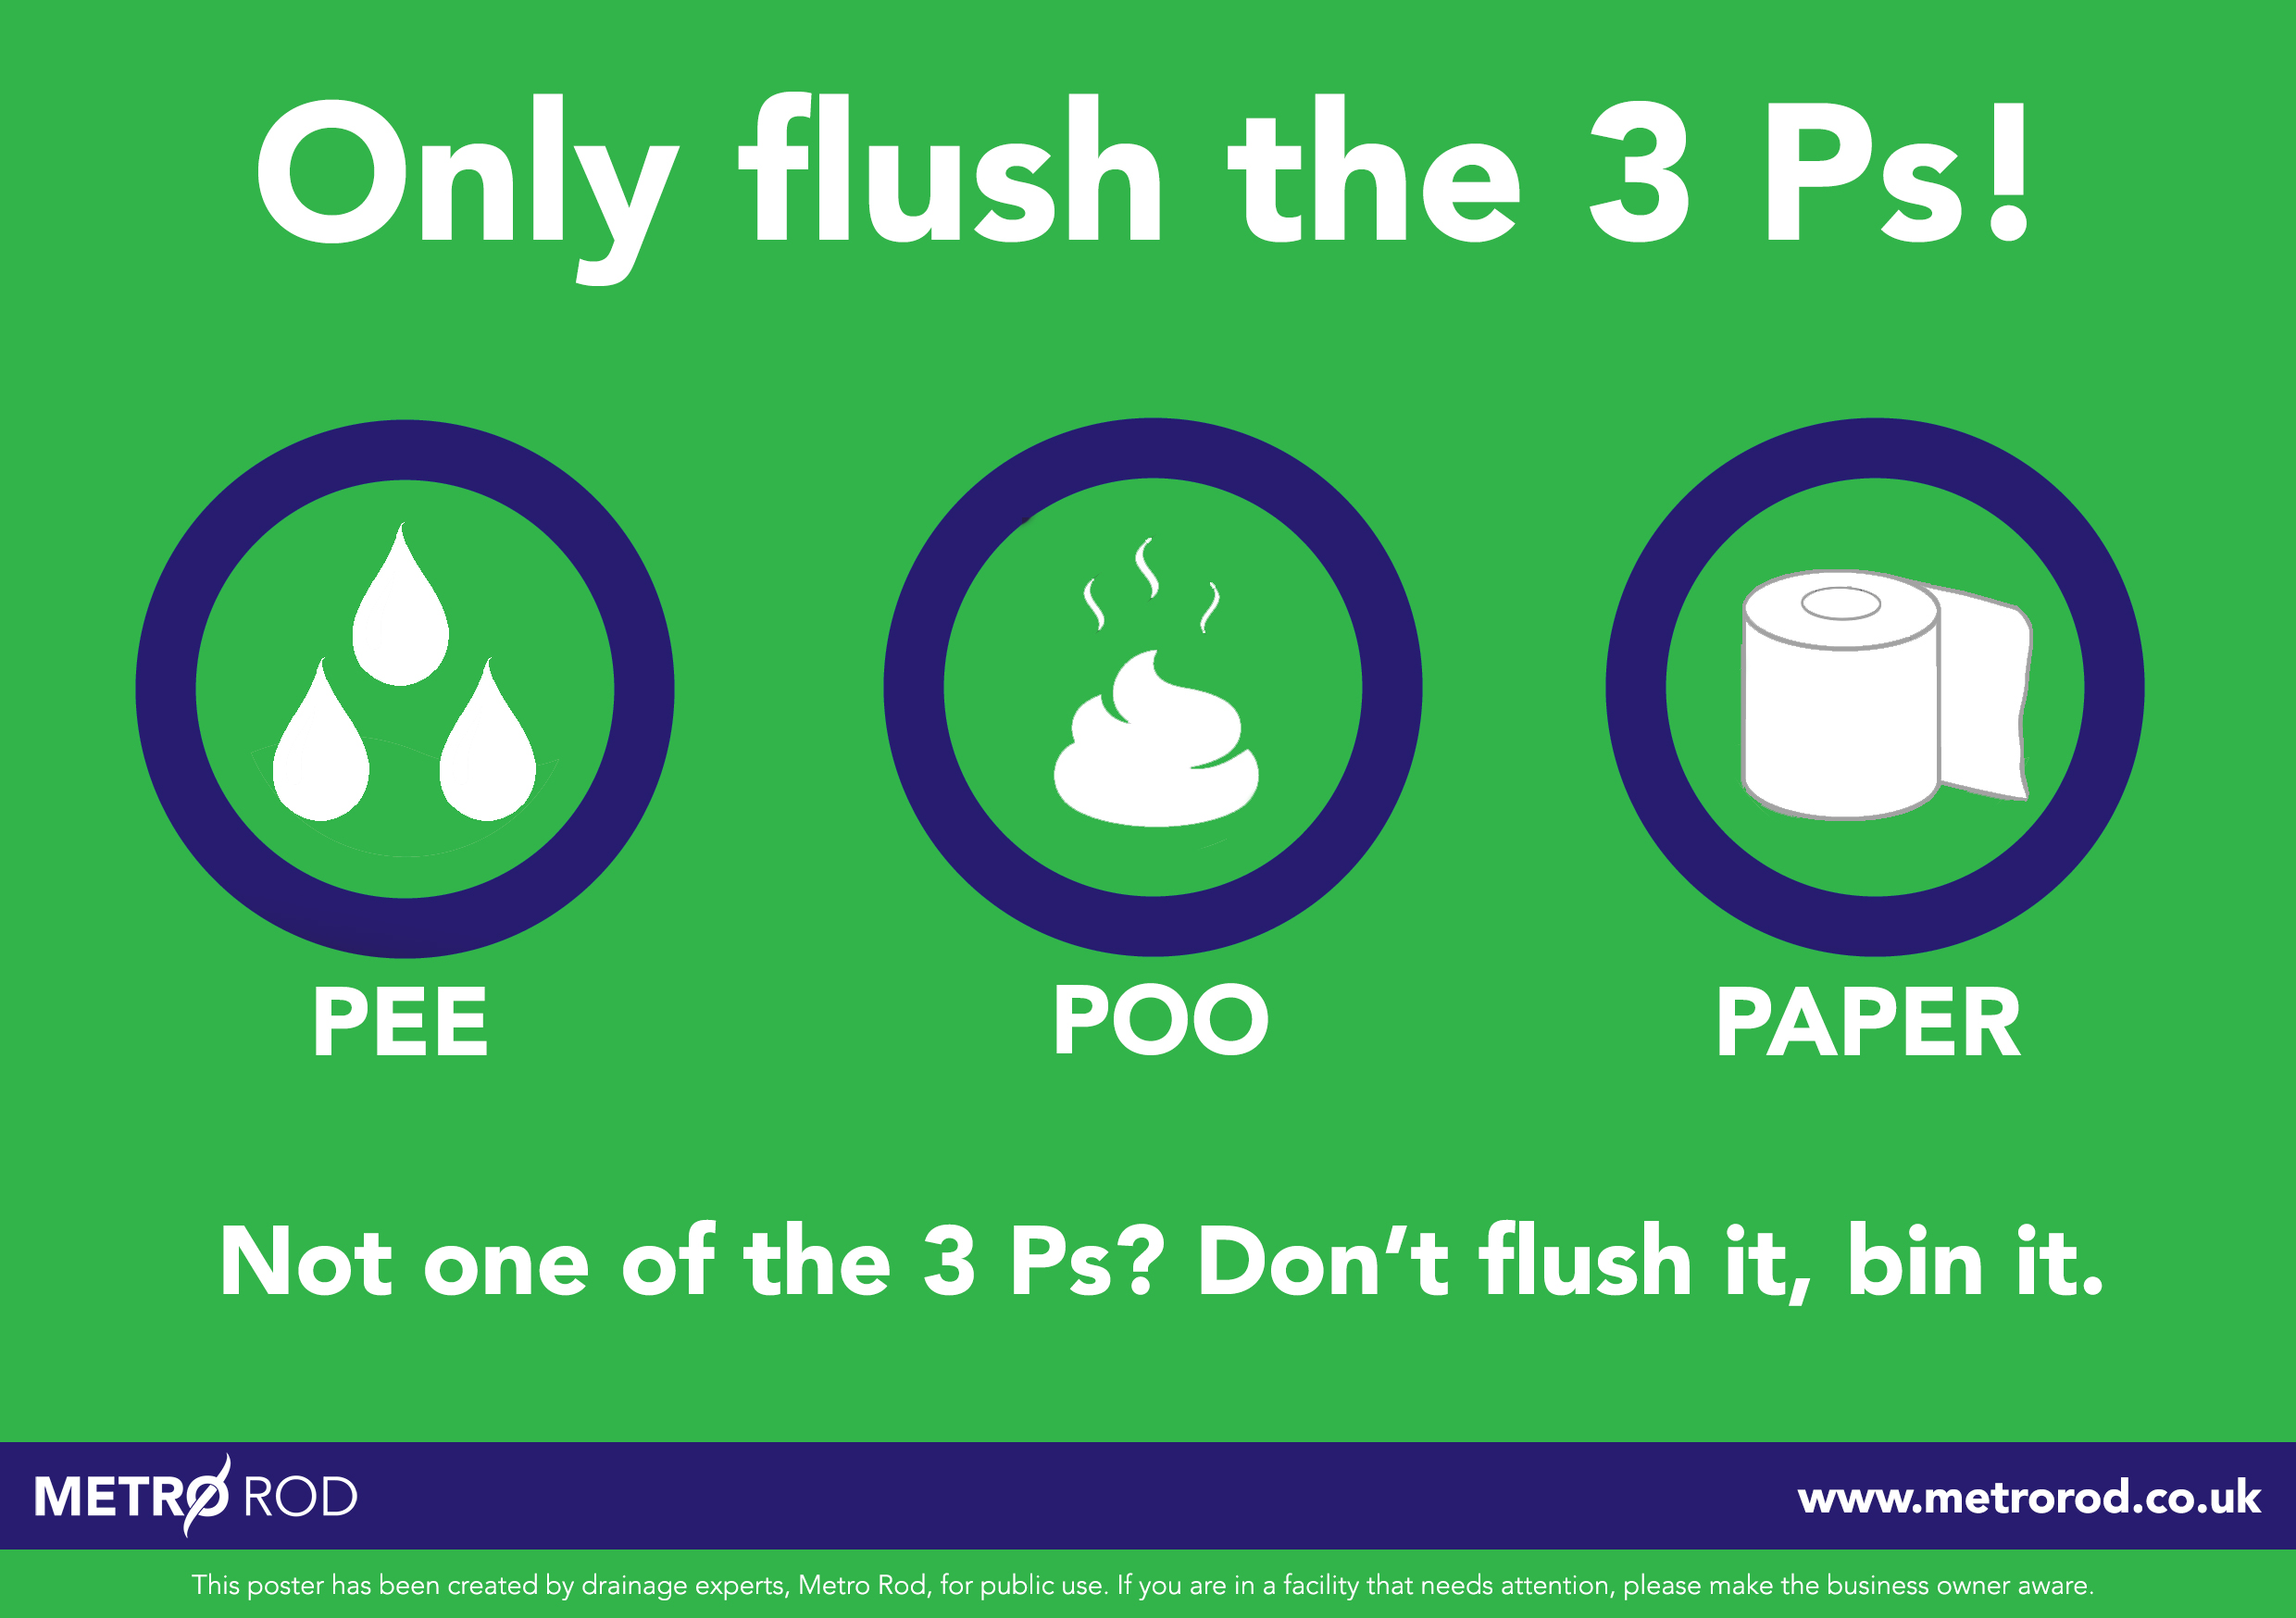 5 Things That Can’t Be Flushed